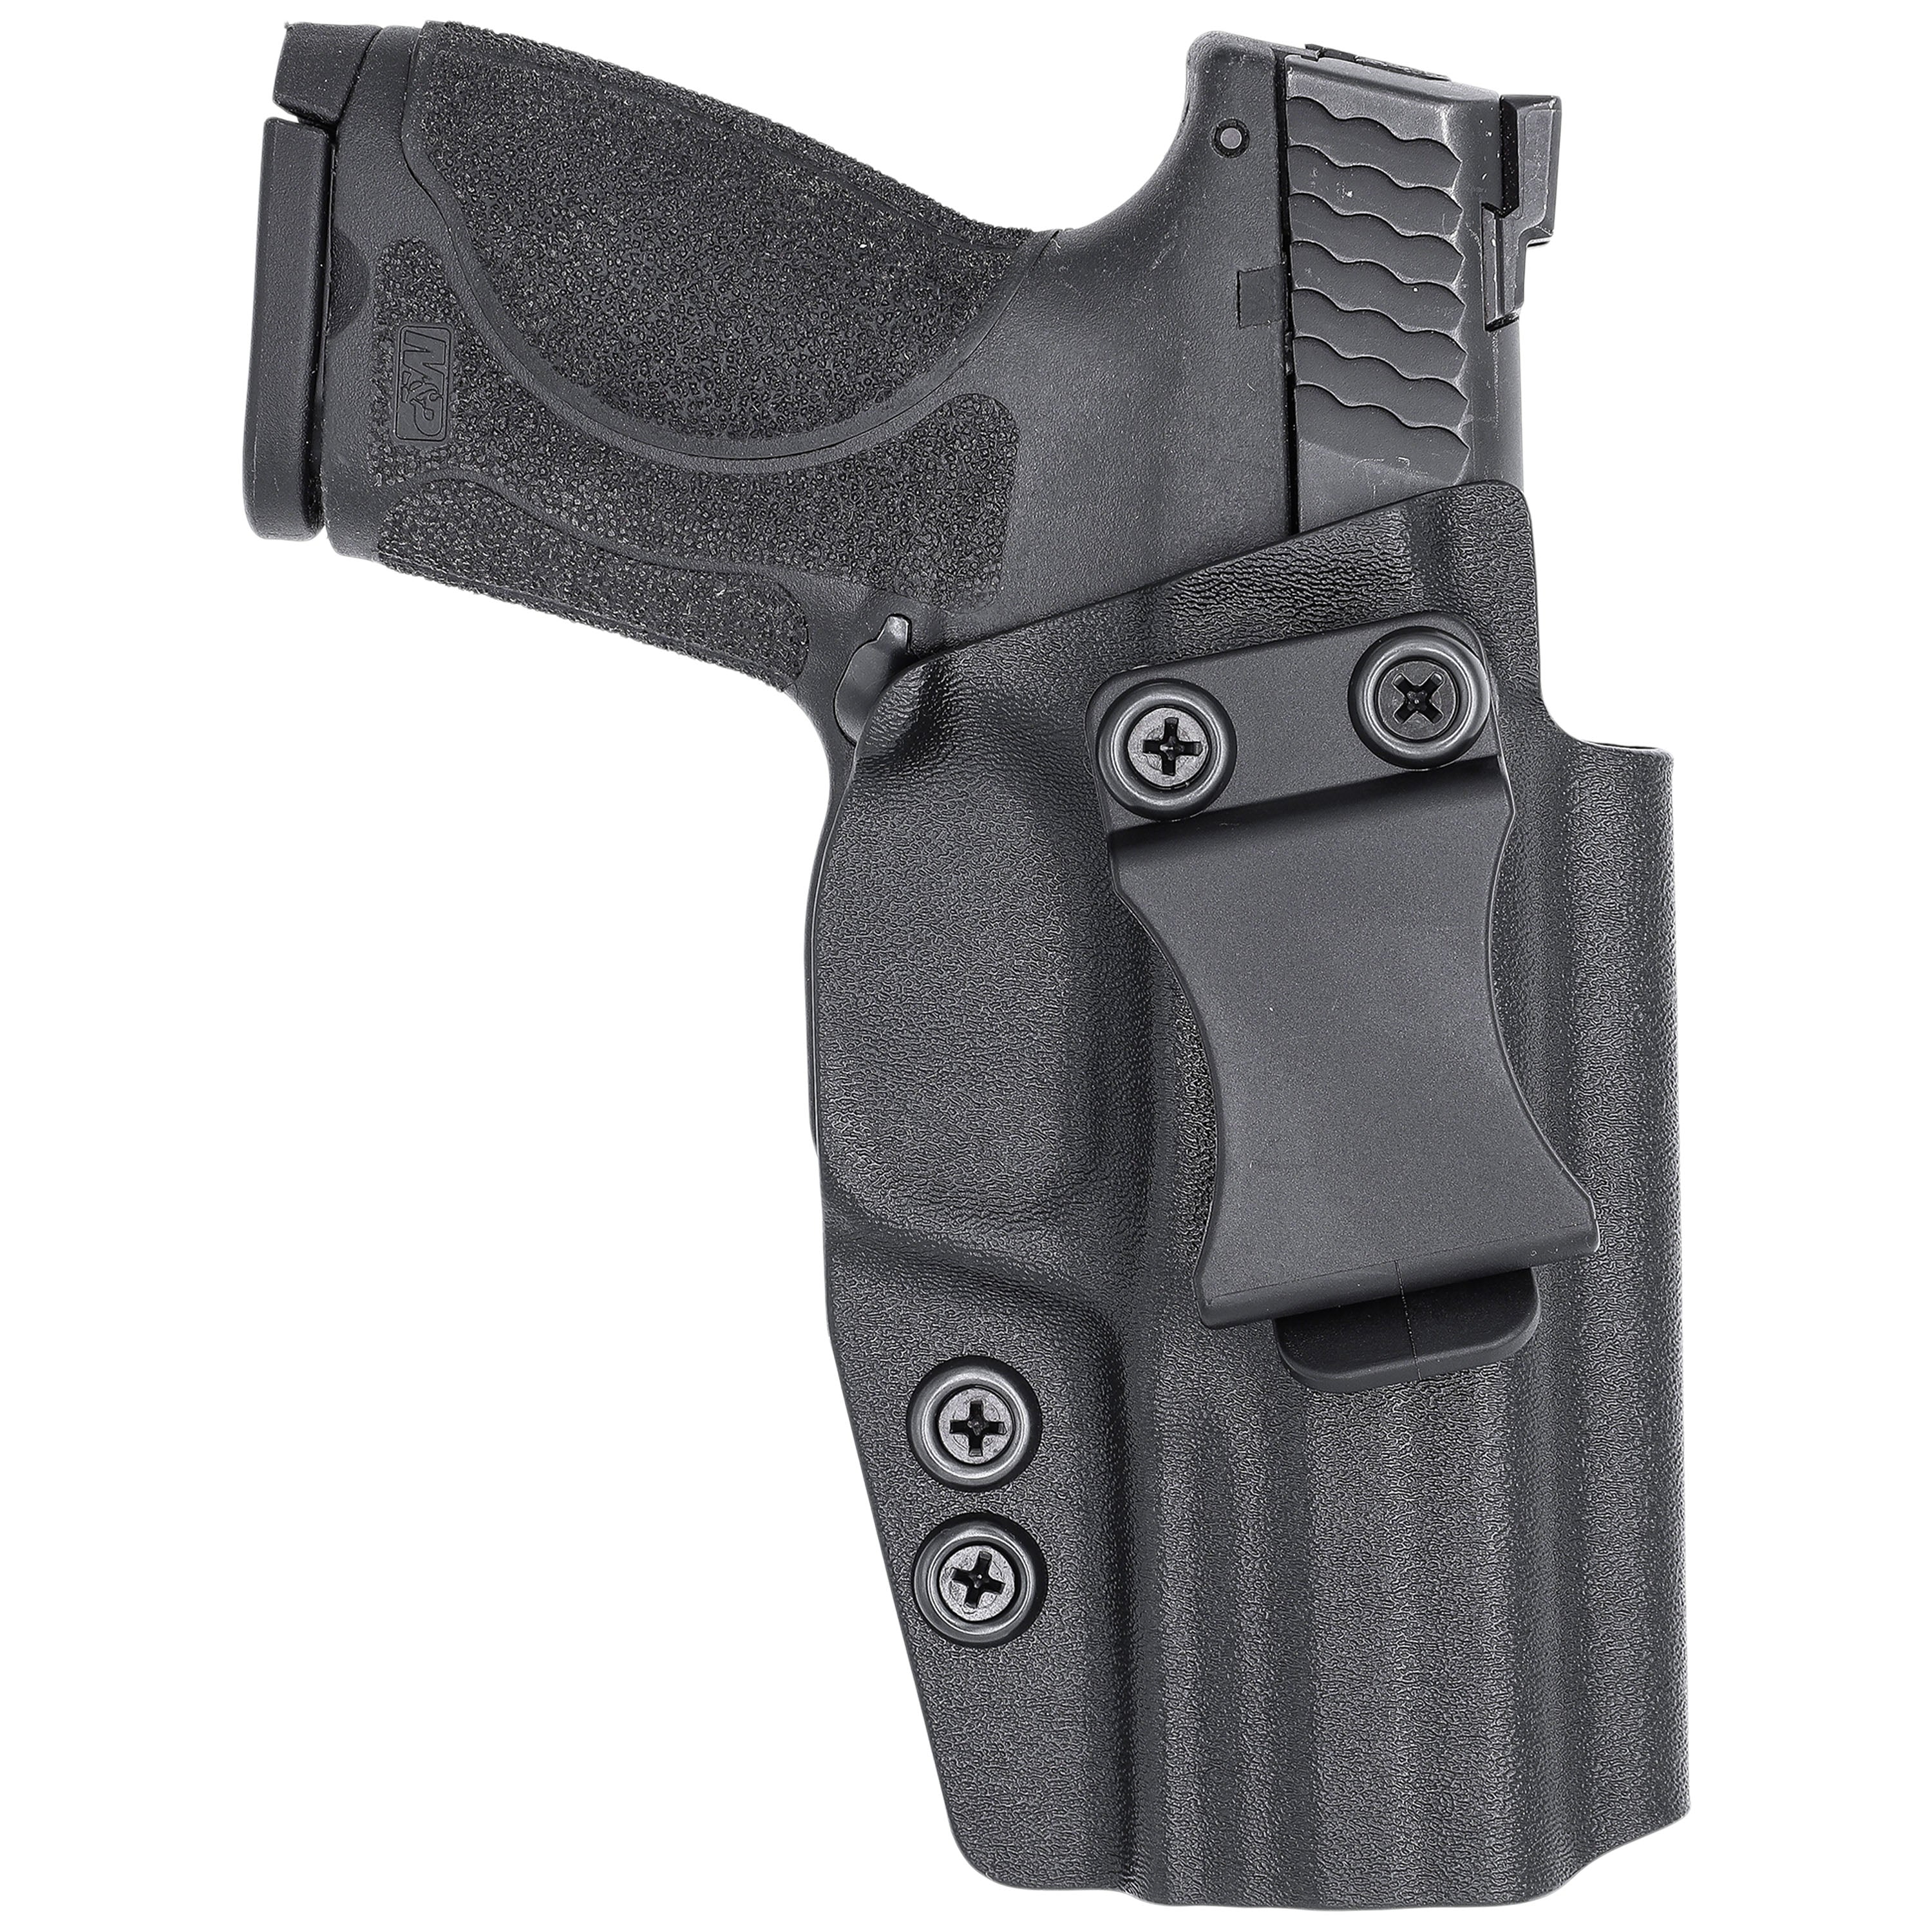 We The People IWB Holster for Smith & Wesson M&P / M2.0 (4 & 4.25)